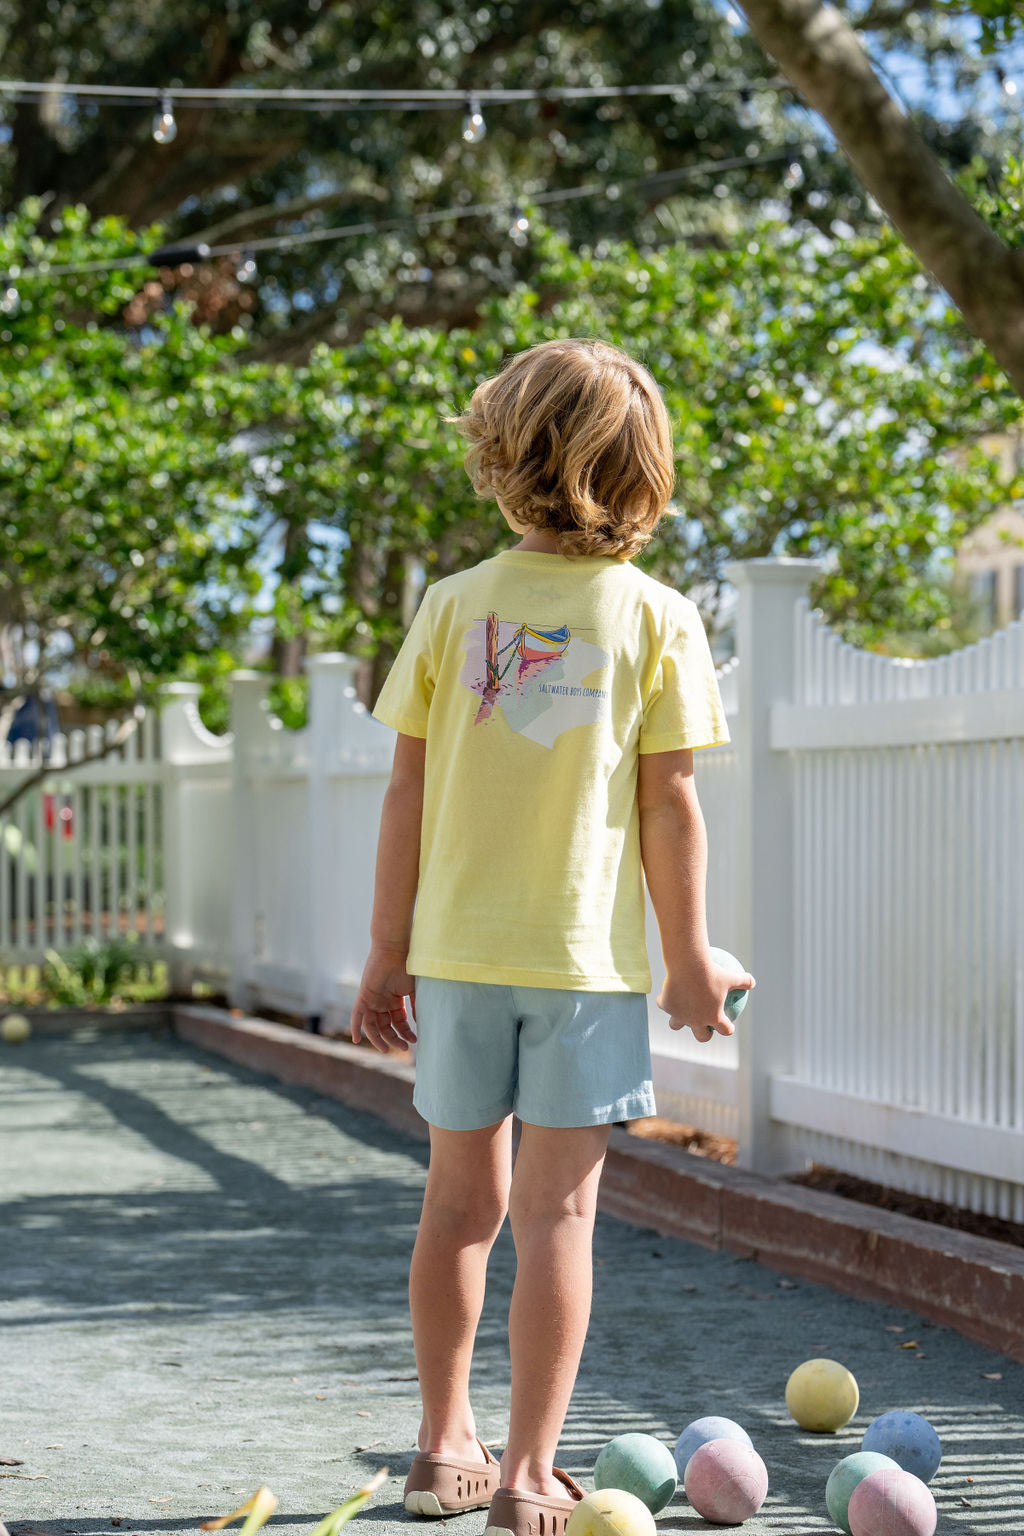 The Art of Dressing Our Boys: Navigating Boys Clothing Trends